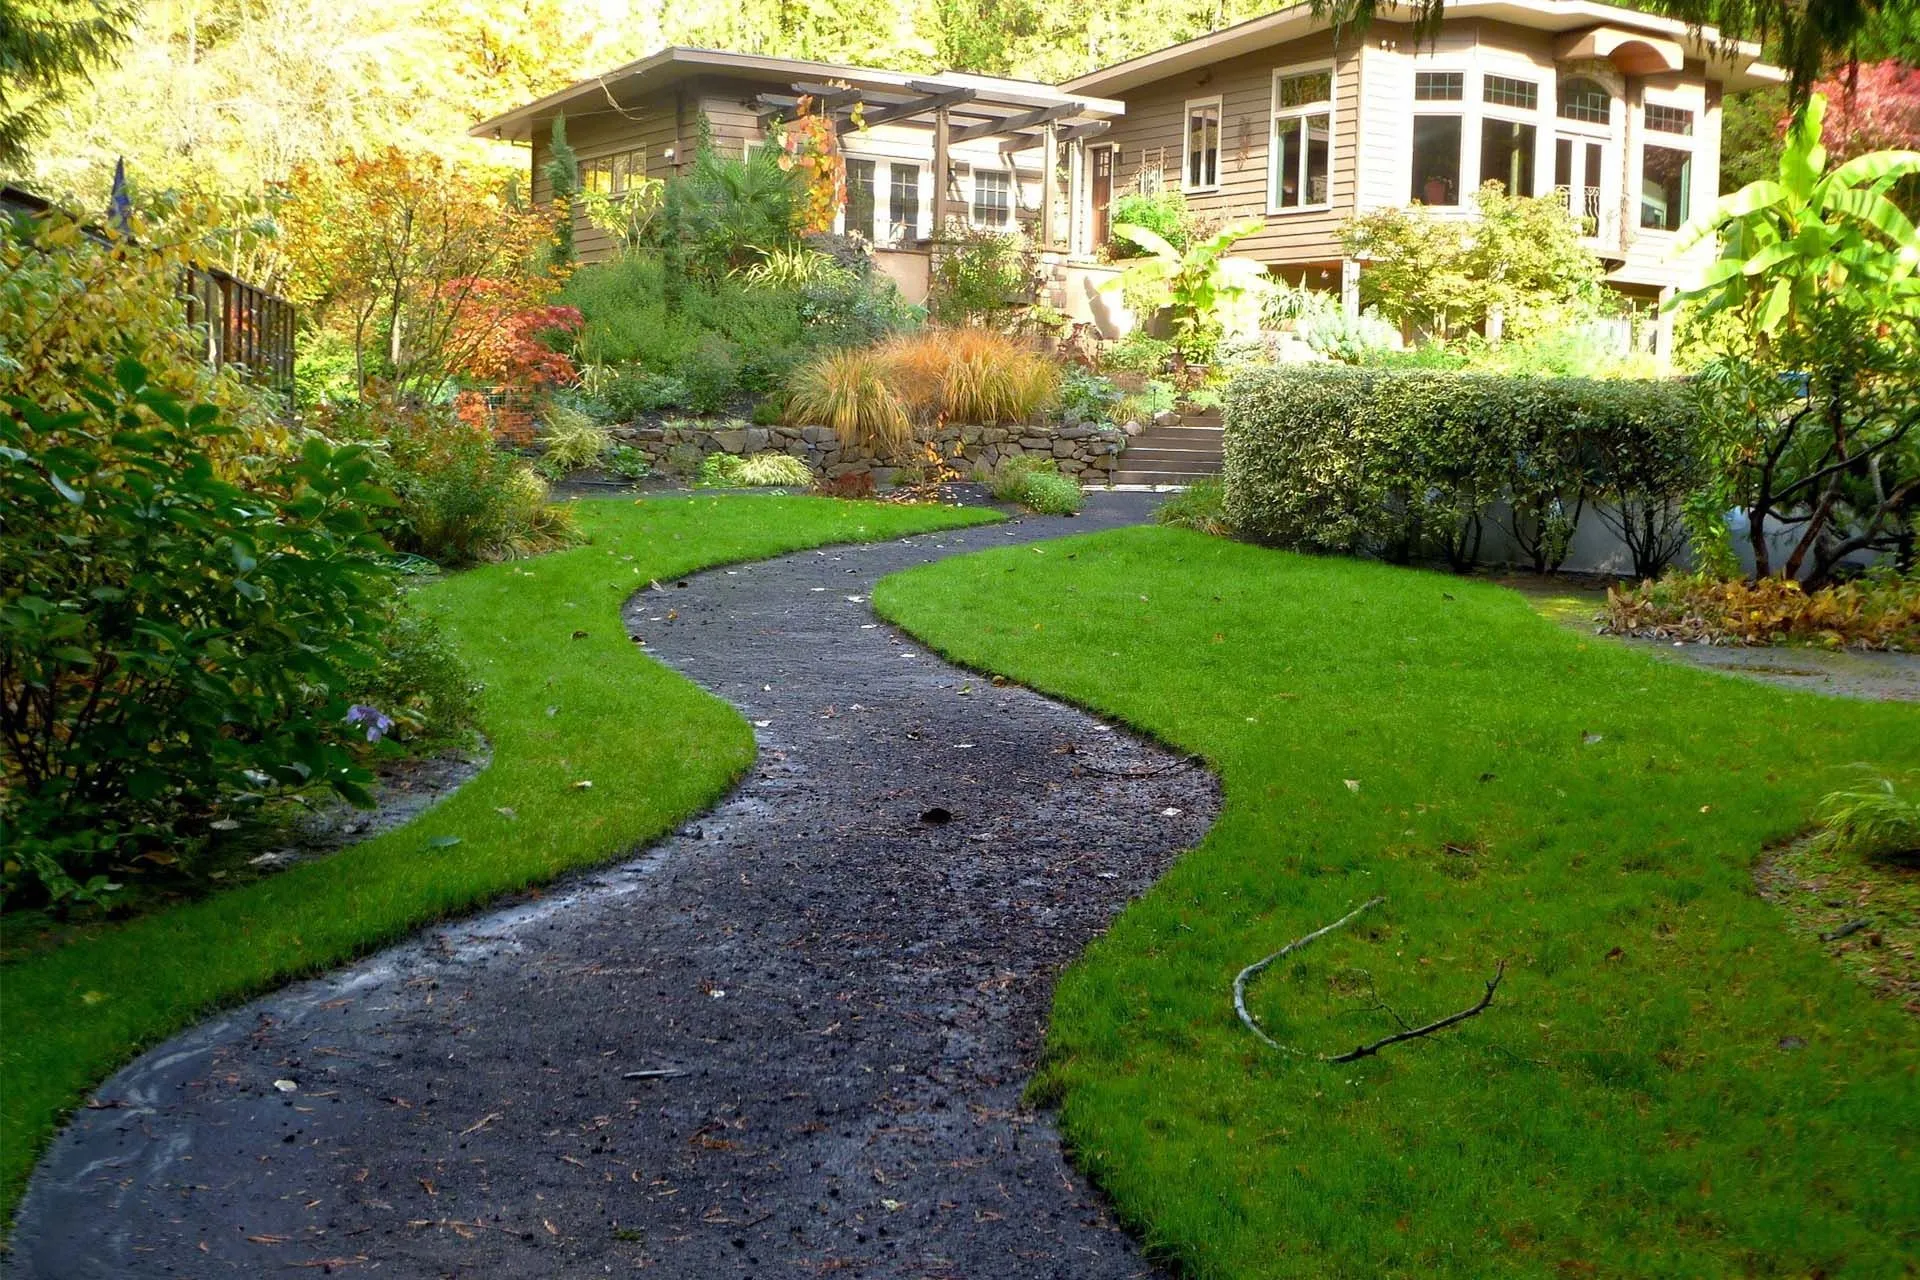 An image of a house's backyard that features a pathway, a lawn and several plants